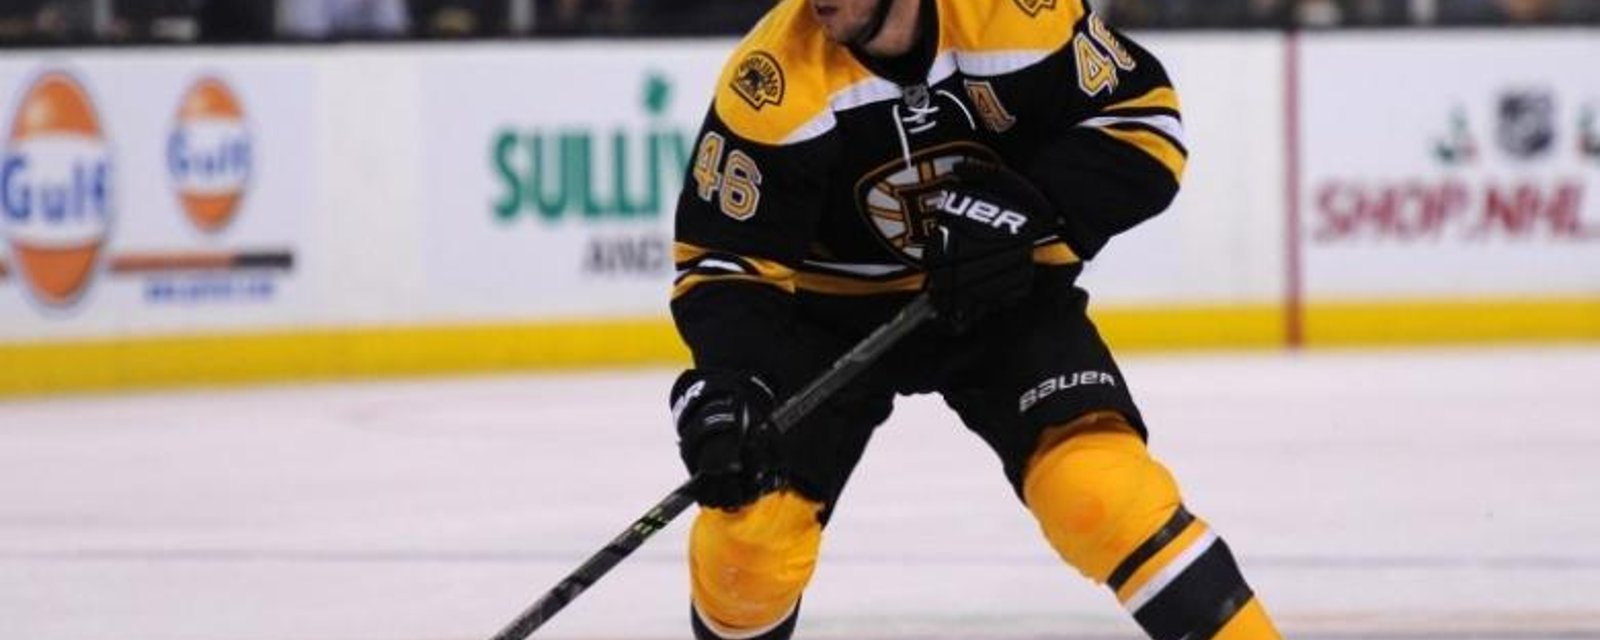 How The Bruins Fared Without David Krejci